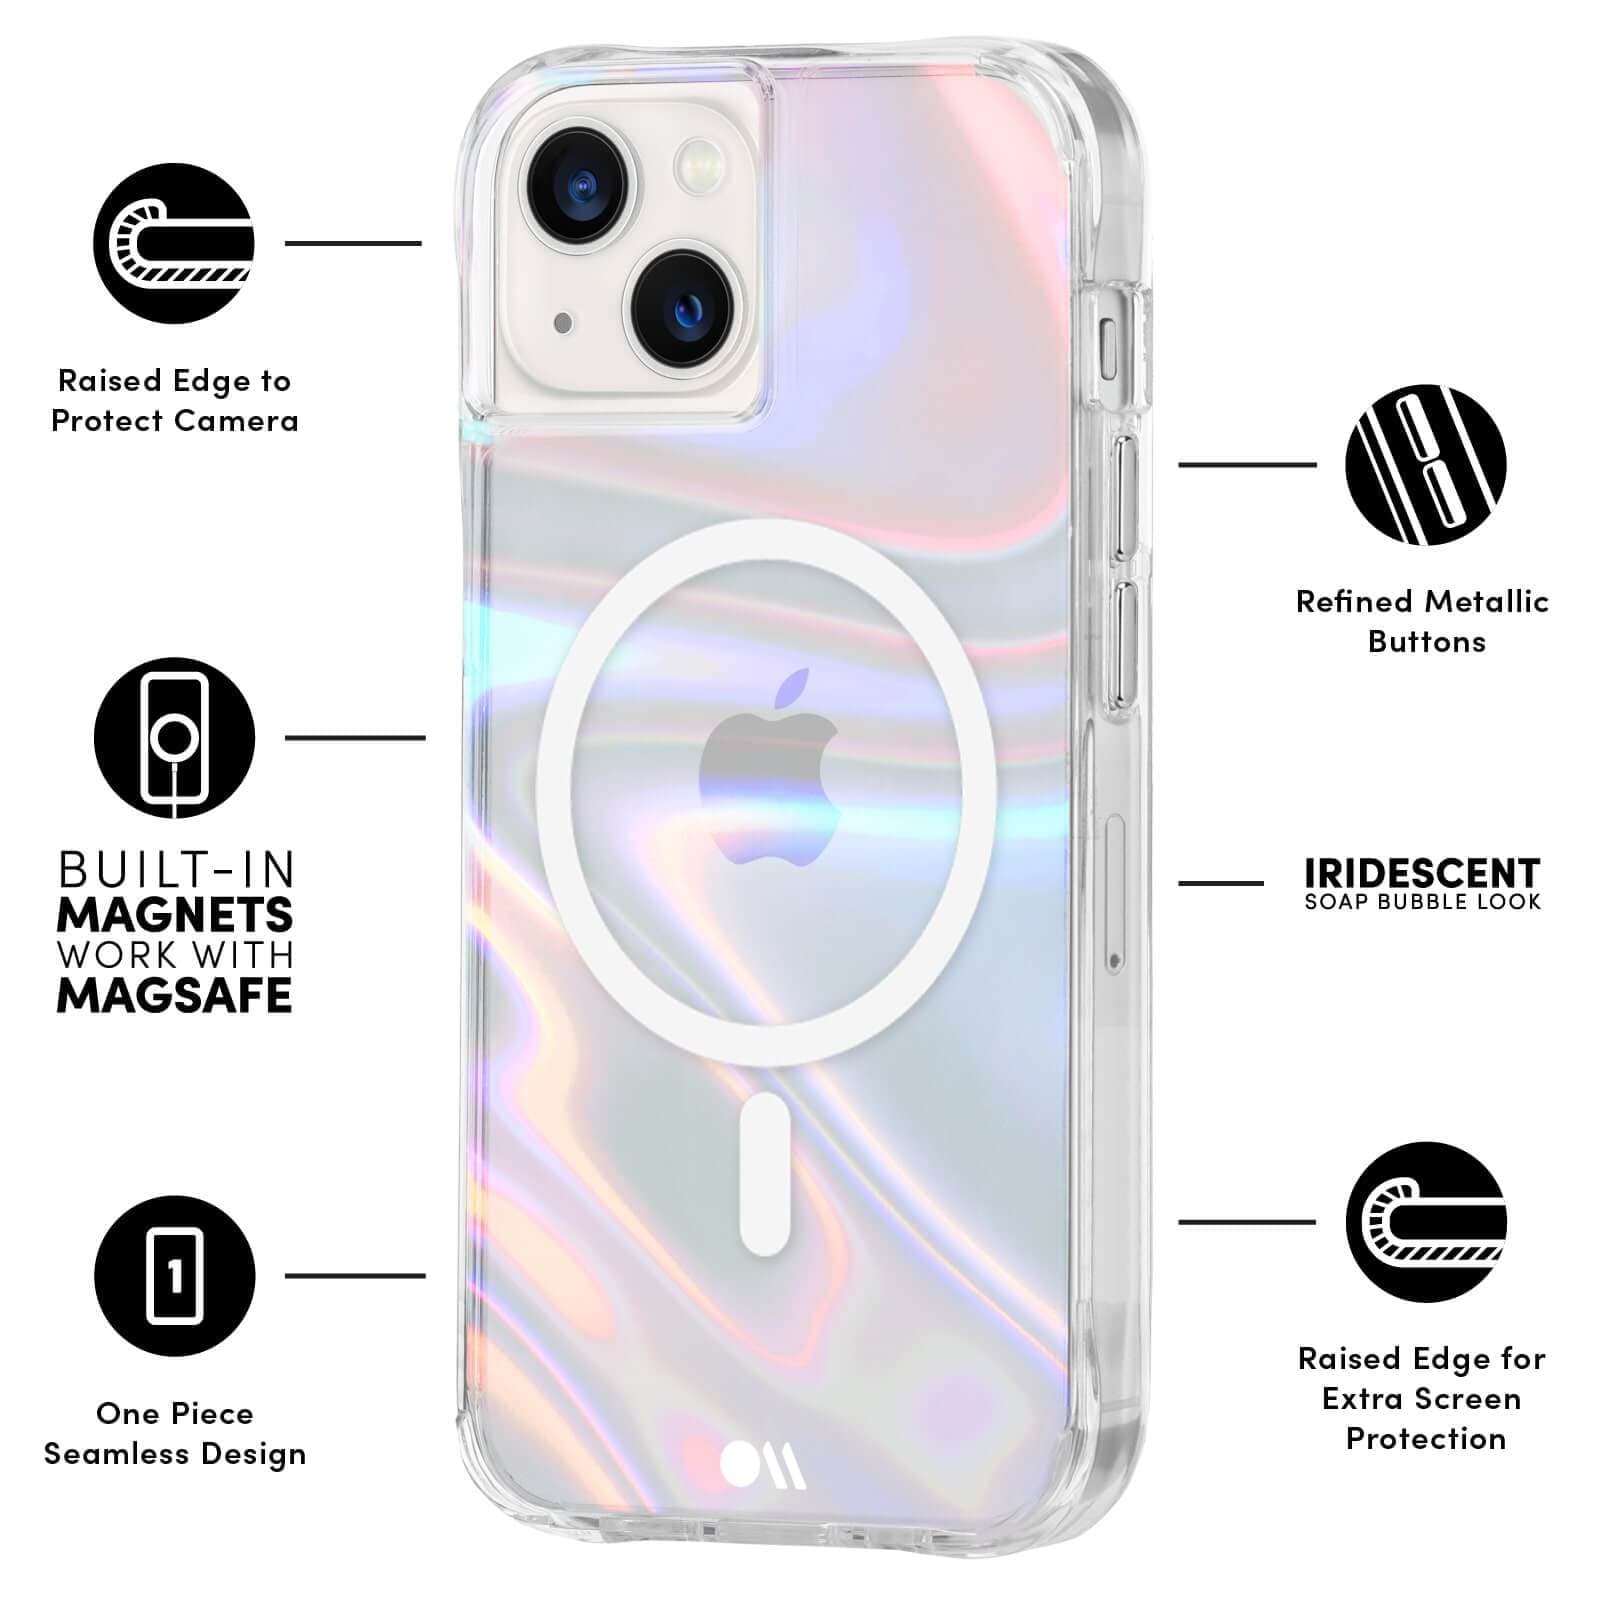 FEATURES: RAISED EDGE TO PROTECT CAMERA, BUILT-IN MAGNETS WORK WITH MAGSAFE, ONE PIECE SEAMLESS DESIGN, REFINED METALLIC BUTTONS, IRIDESCENT SOAP BUBBLE LOOK. COLOR::SOAP BUBBLE